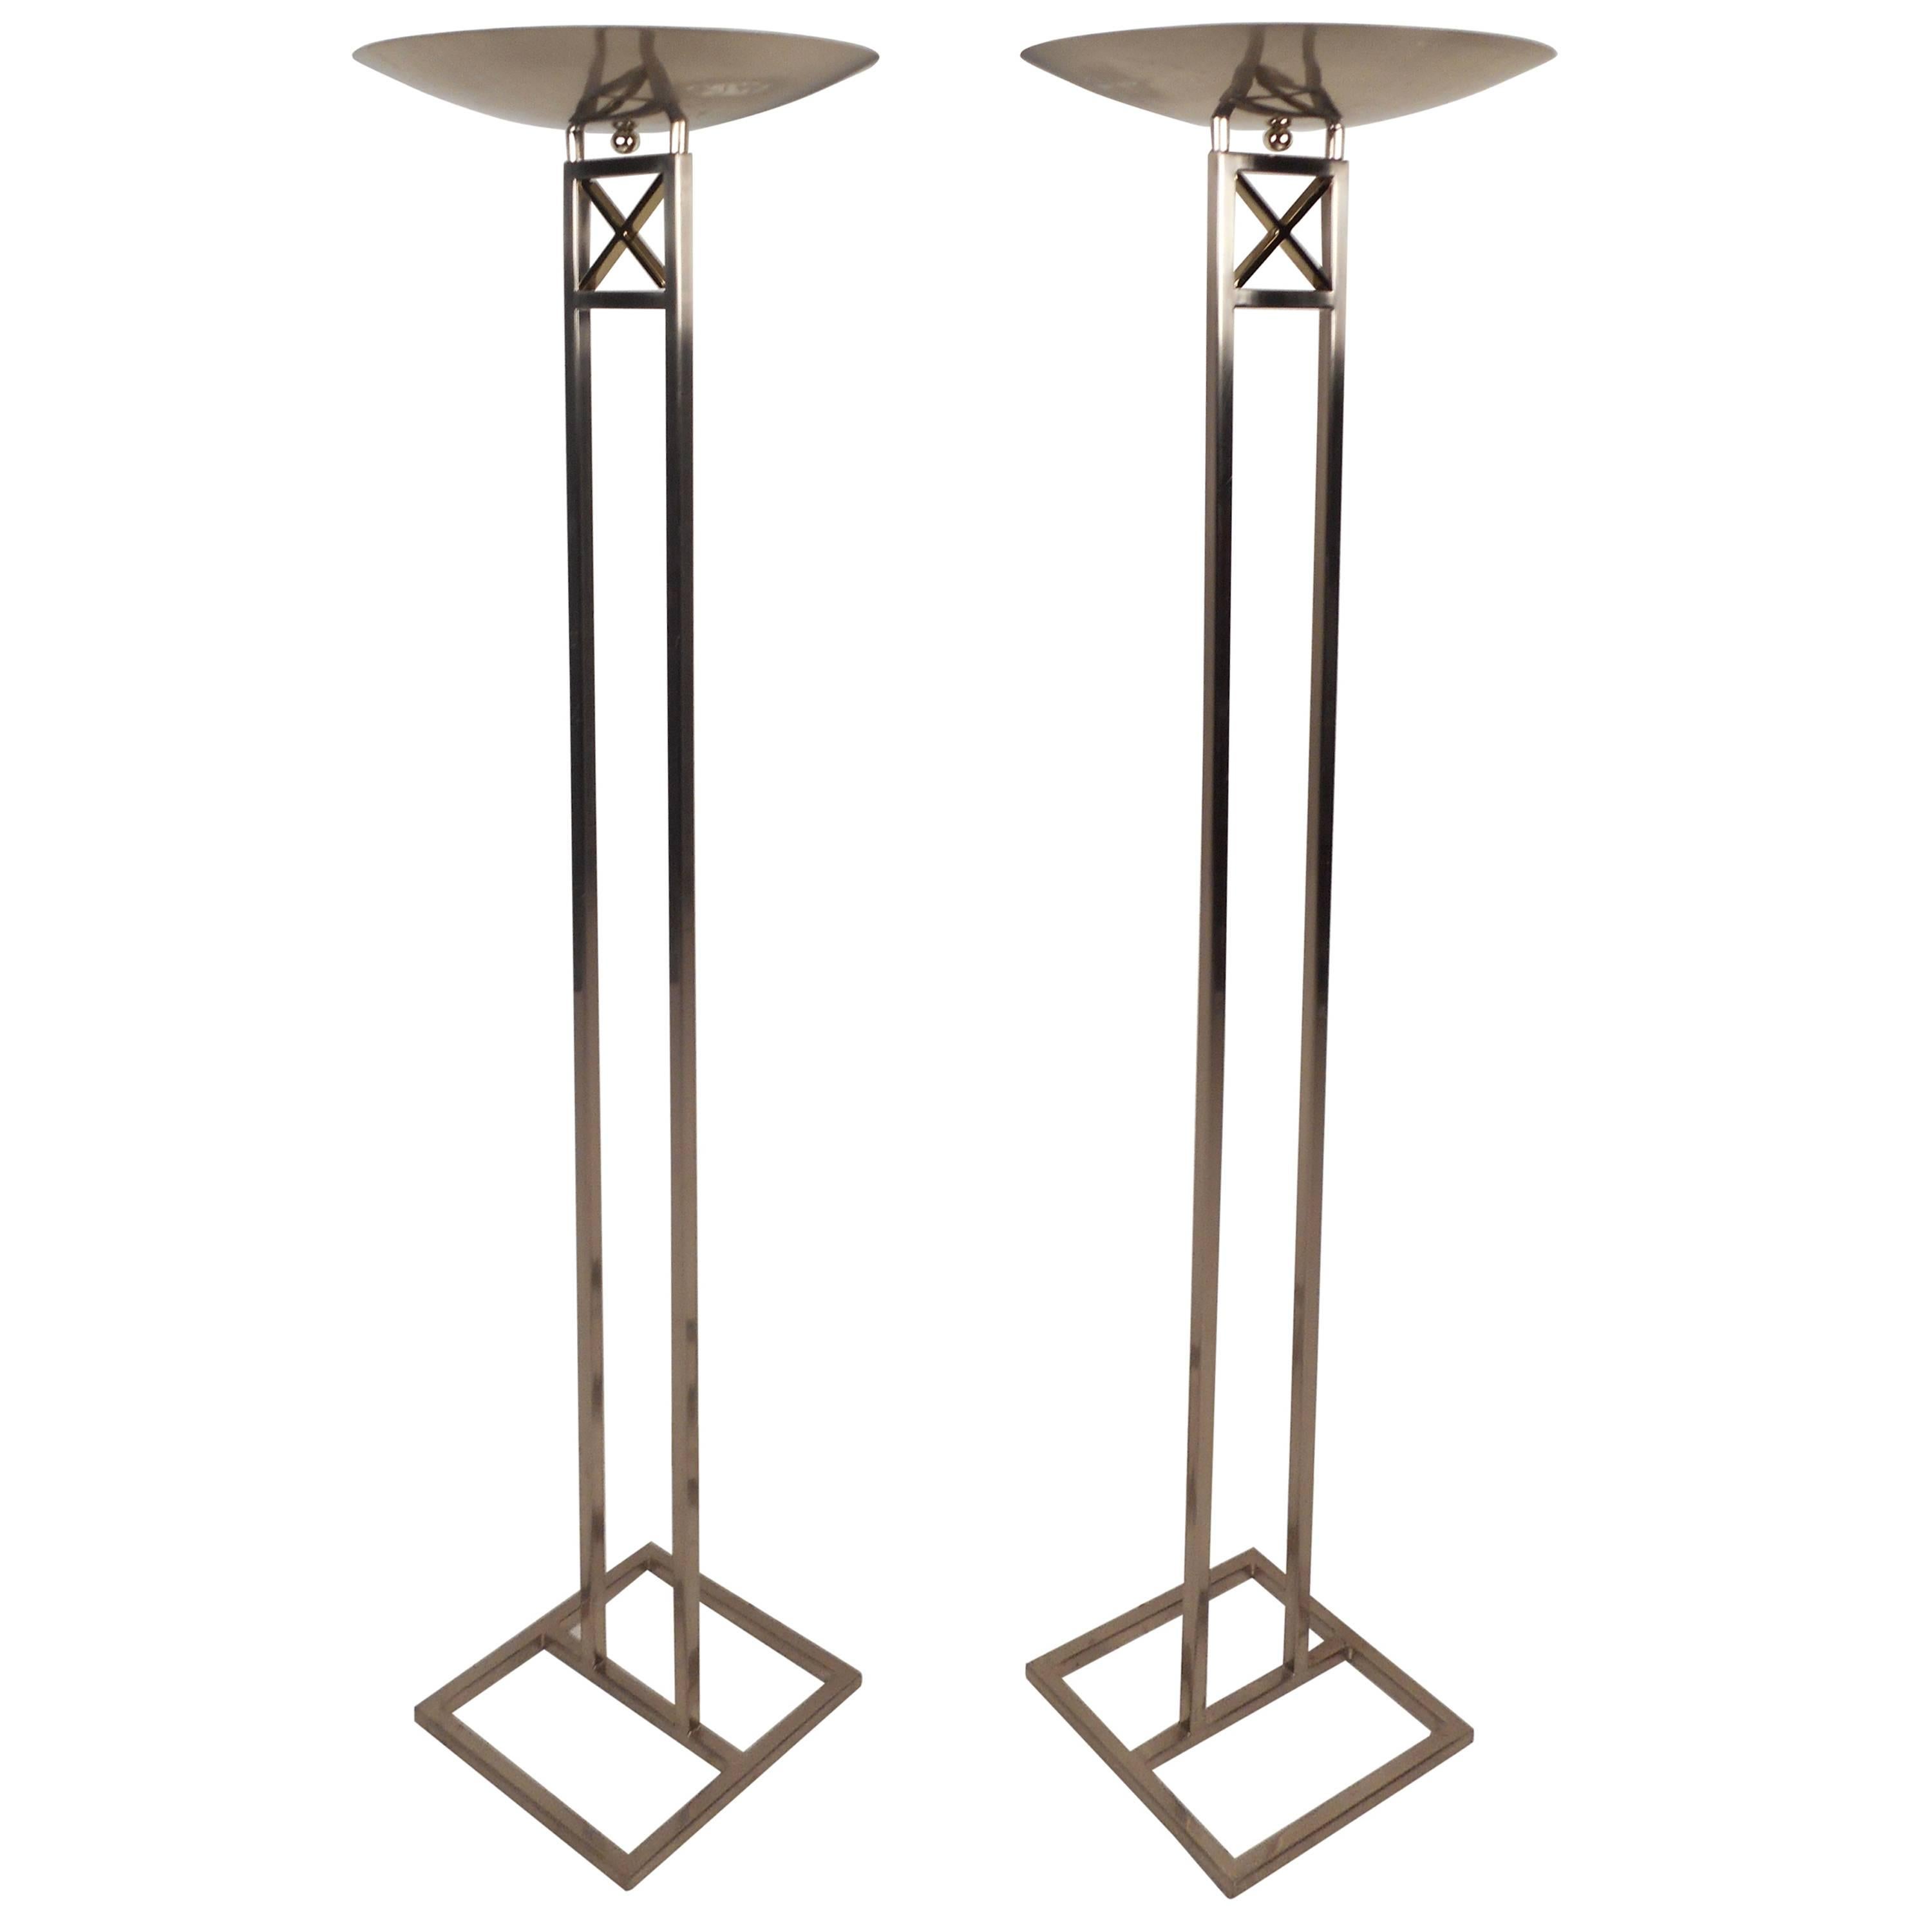 Mid-Century Modern Chrome Torchiere Floor Lamps For Sale